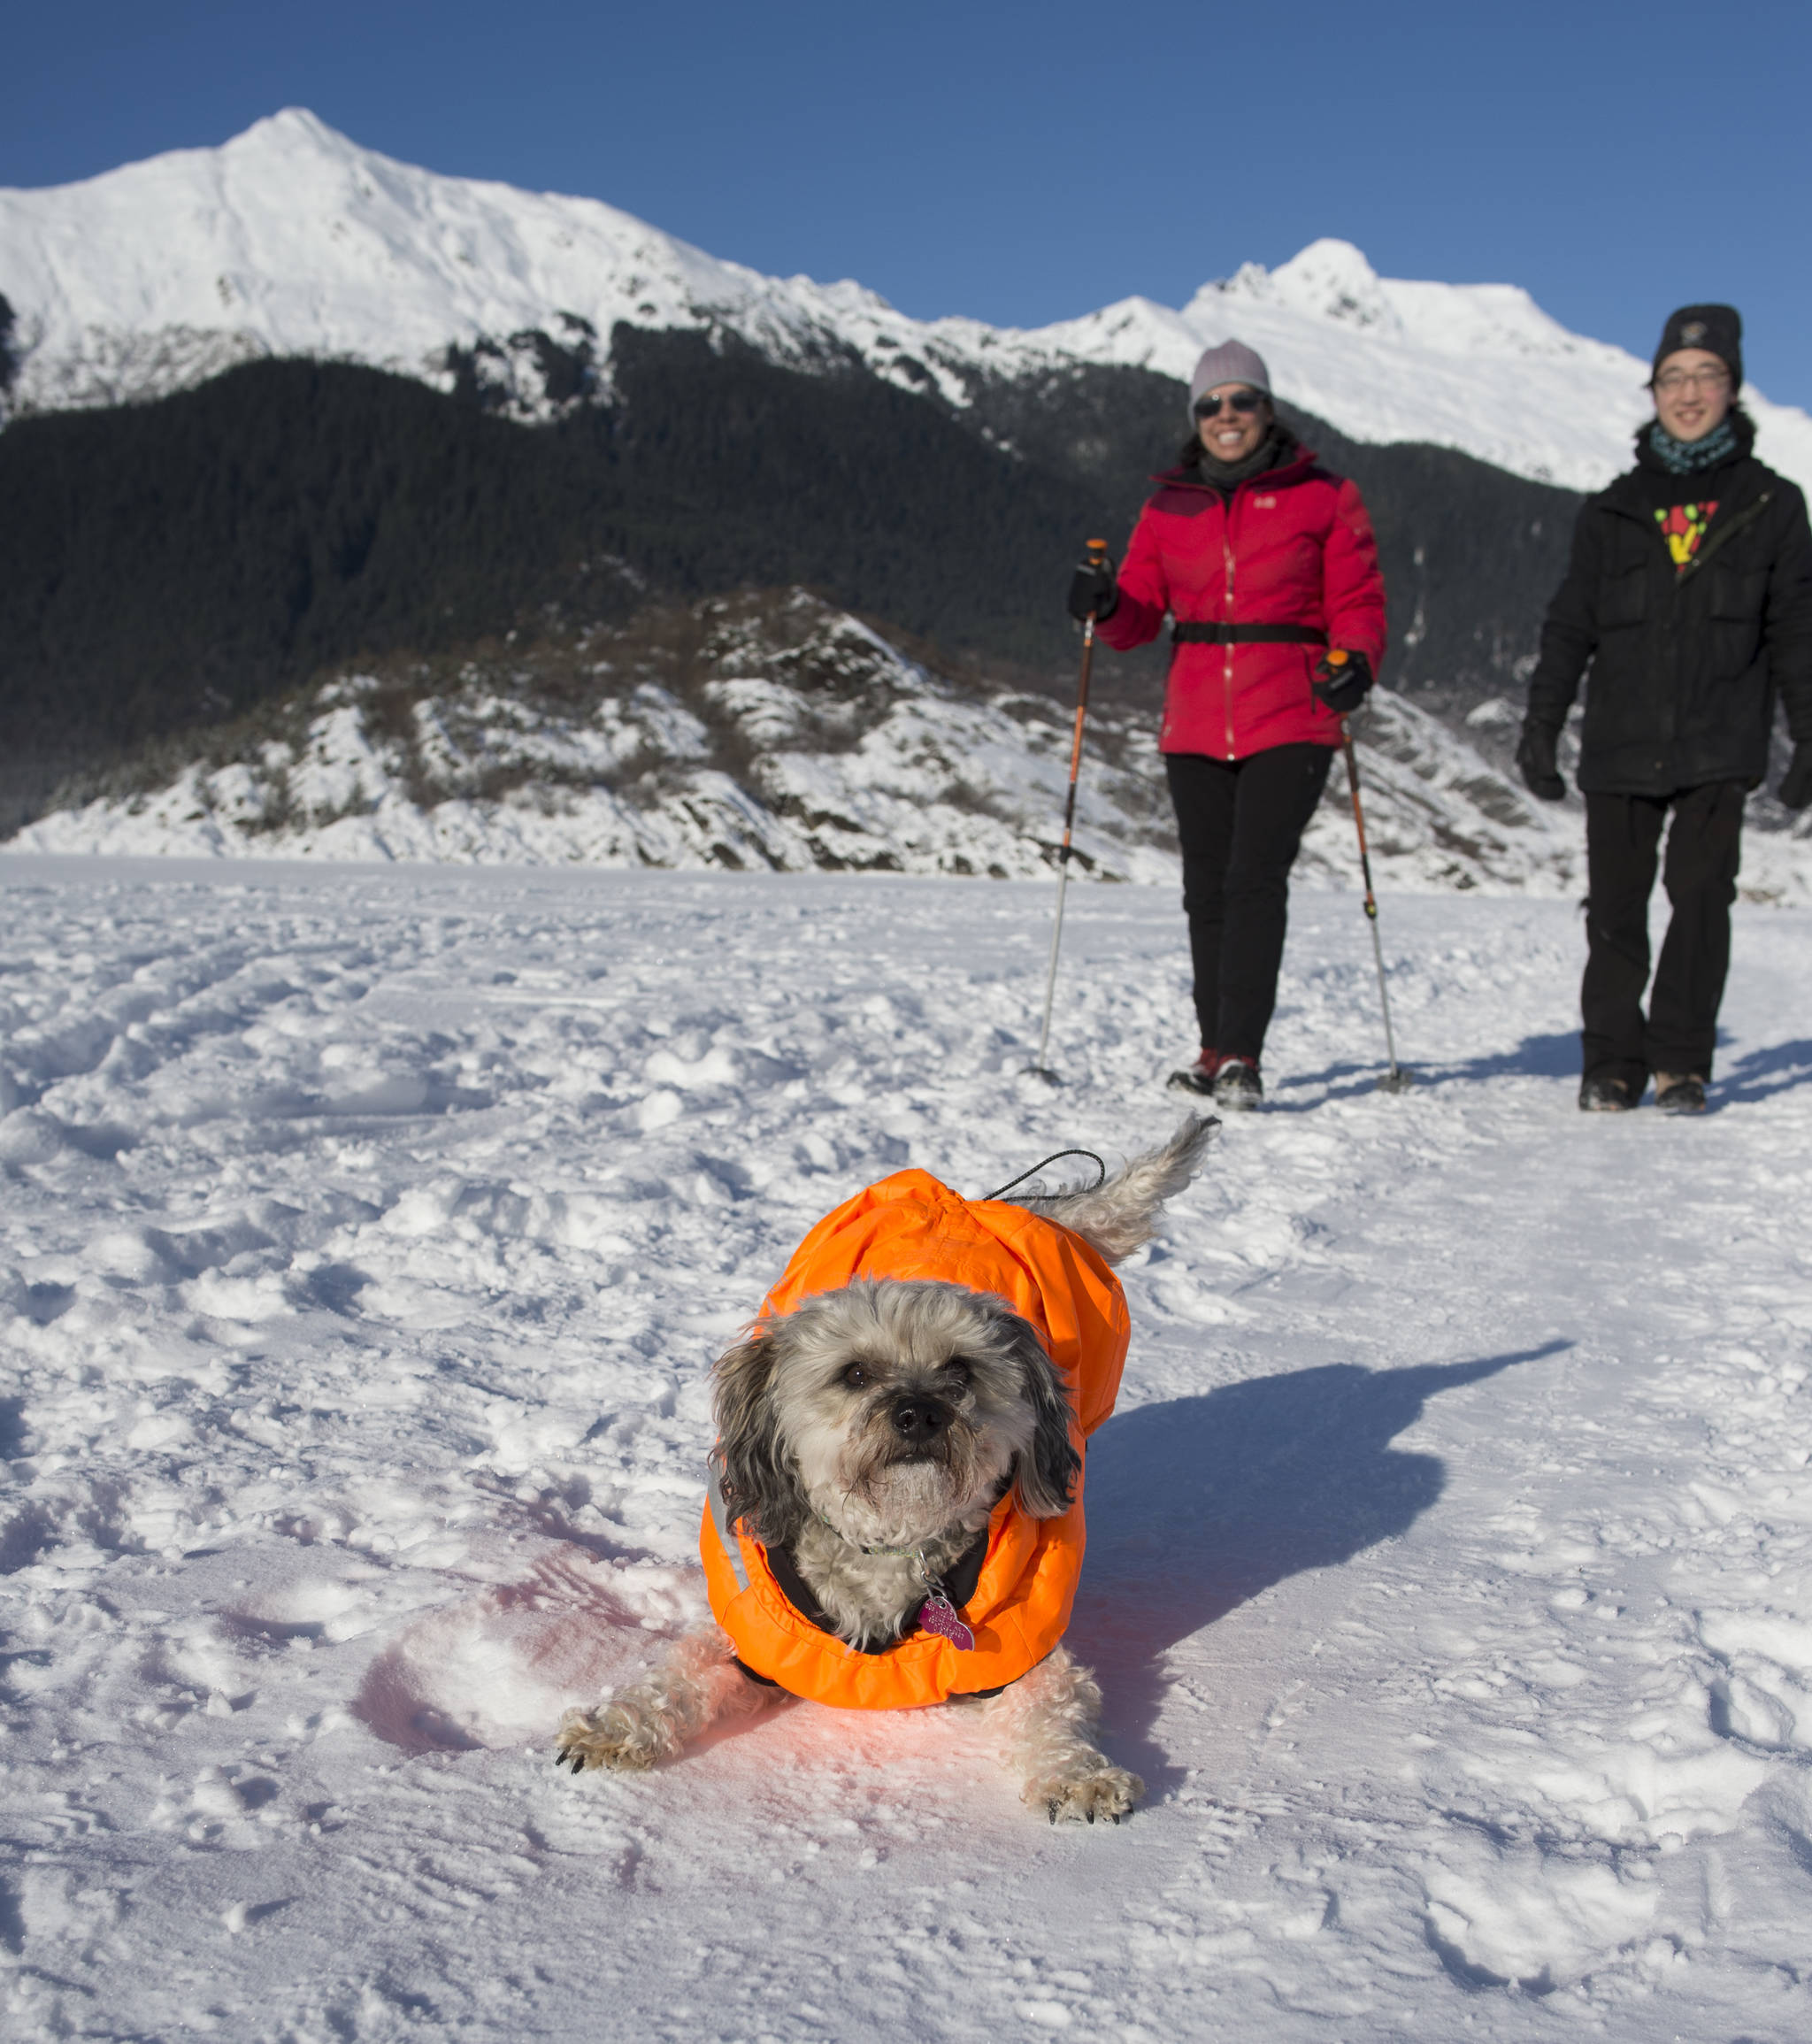 Julie York Coppens and her playful dog, Simeo, returns with Tai Kim, right, from a trip to the Mendenhall Glacier on Monday, Feb. 11, 2019. (Michael Penn | Juneau Empire)